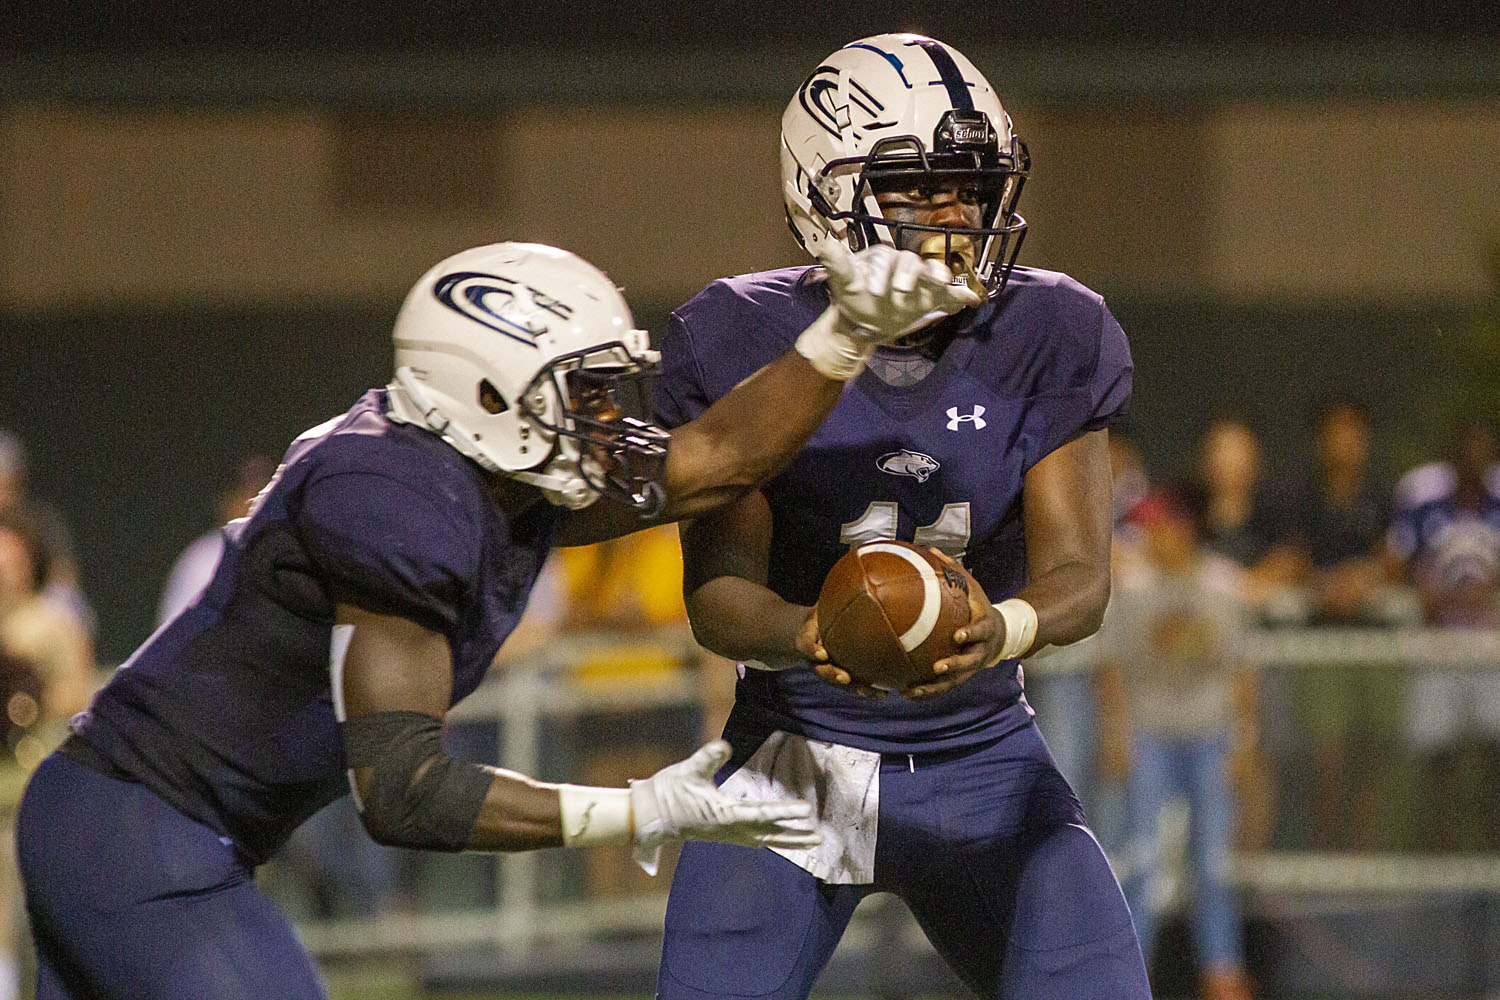 Clay-Chalkville's offense comes alive in 31-13 victory over Shades Valley